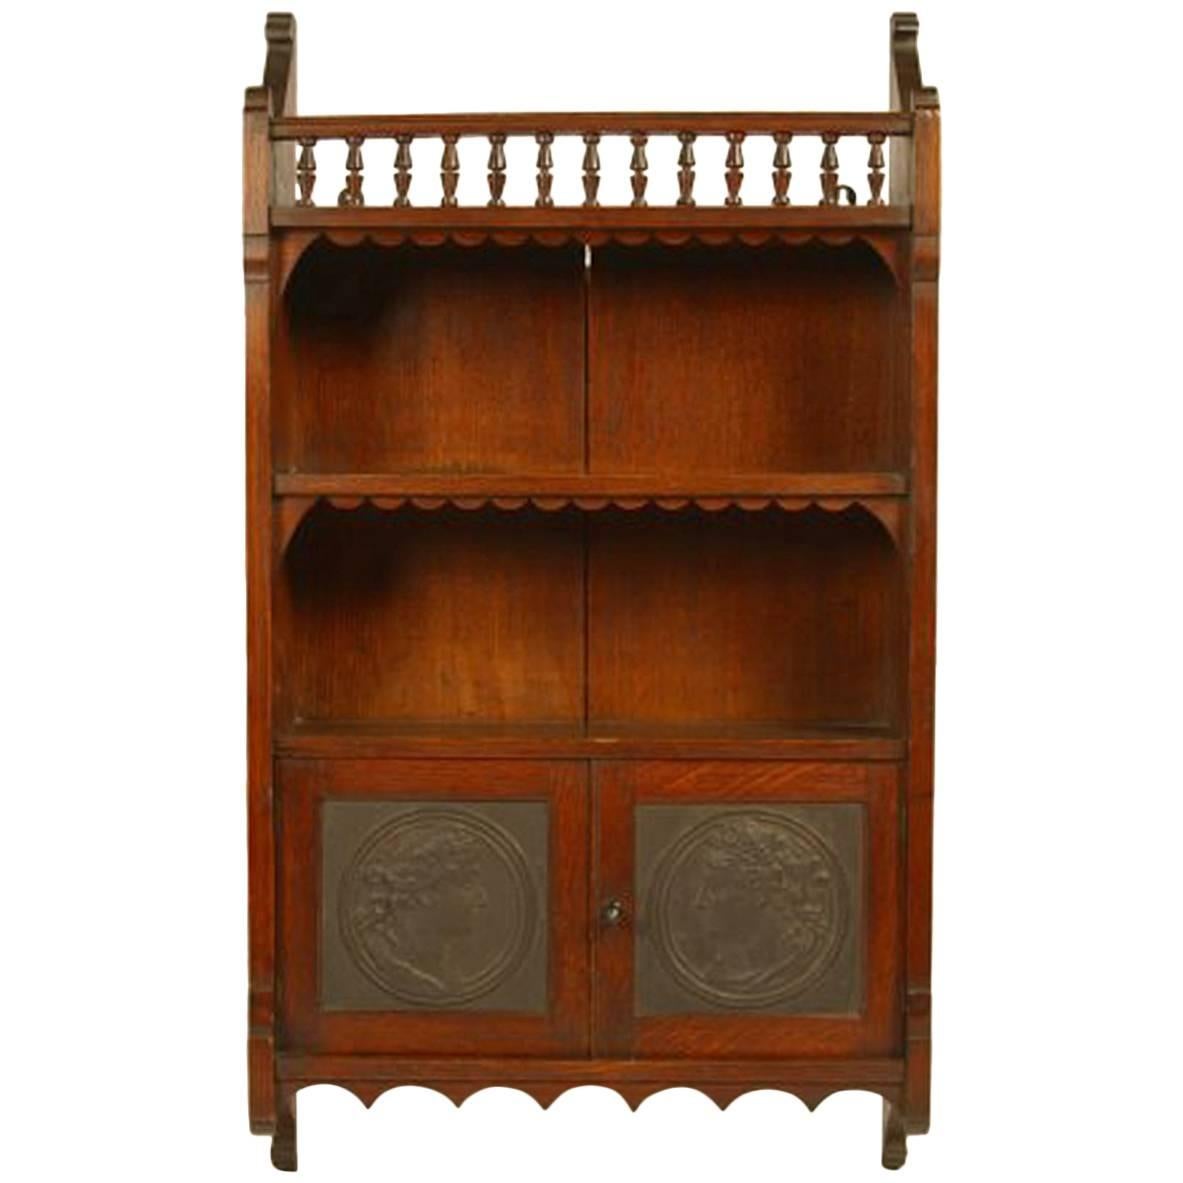  E W Godwin Attr An Anglo-Japanese Oak Wall Cabinet with embossed Leather Panels For Sale